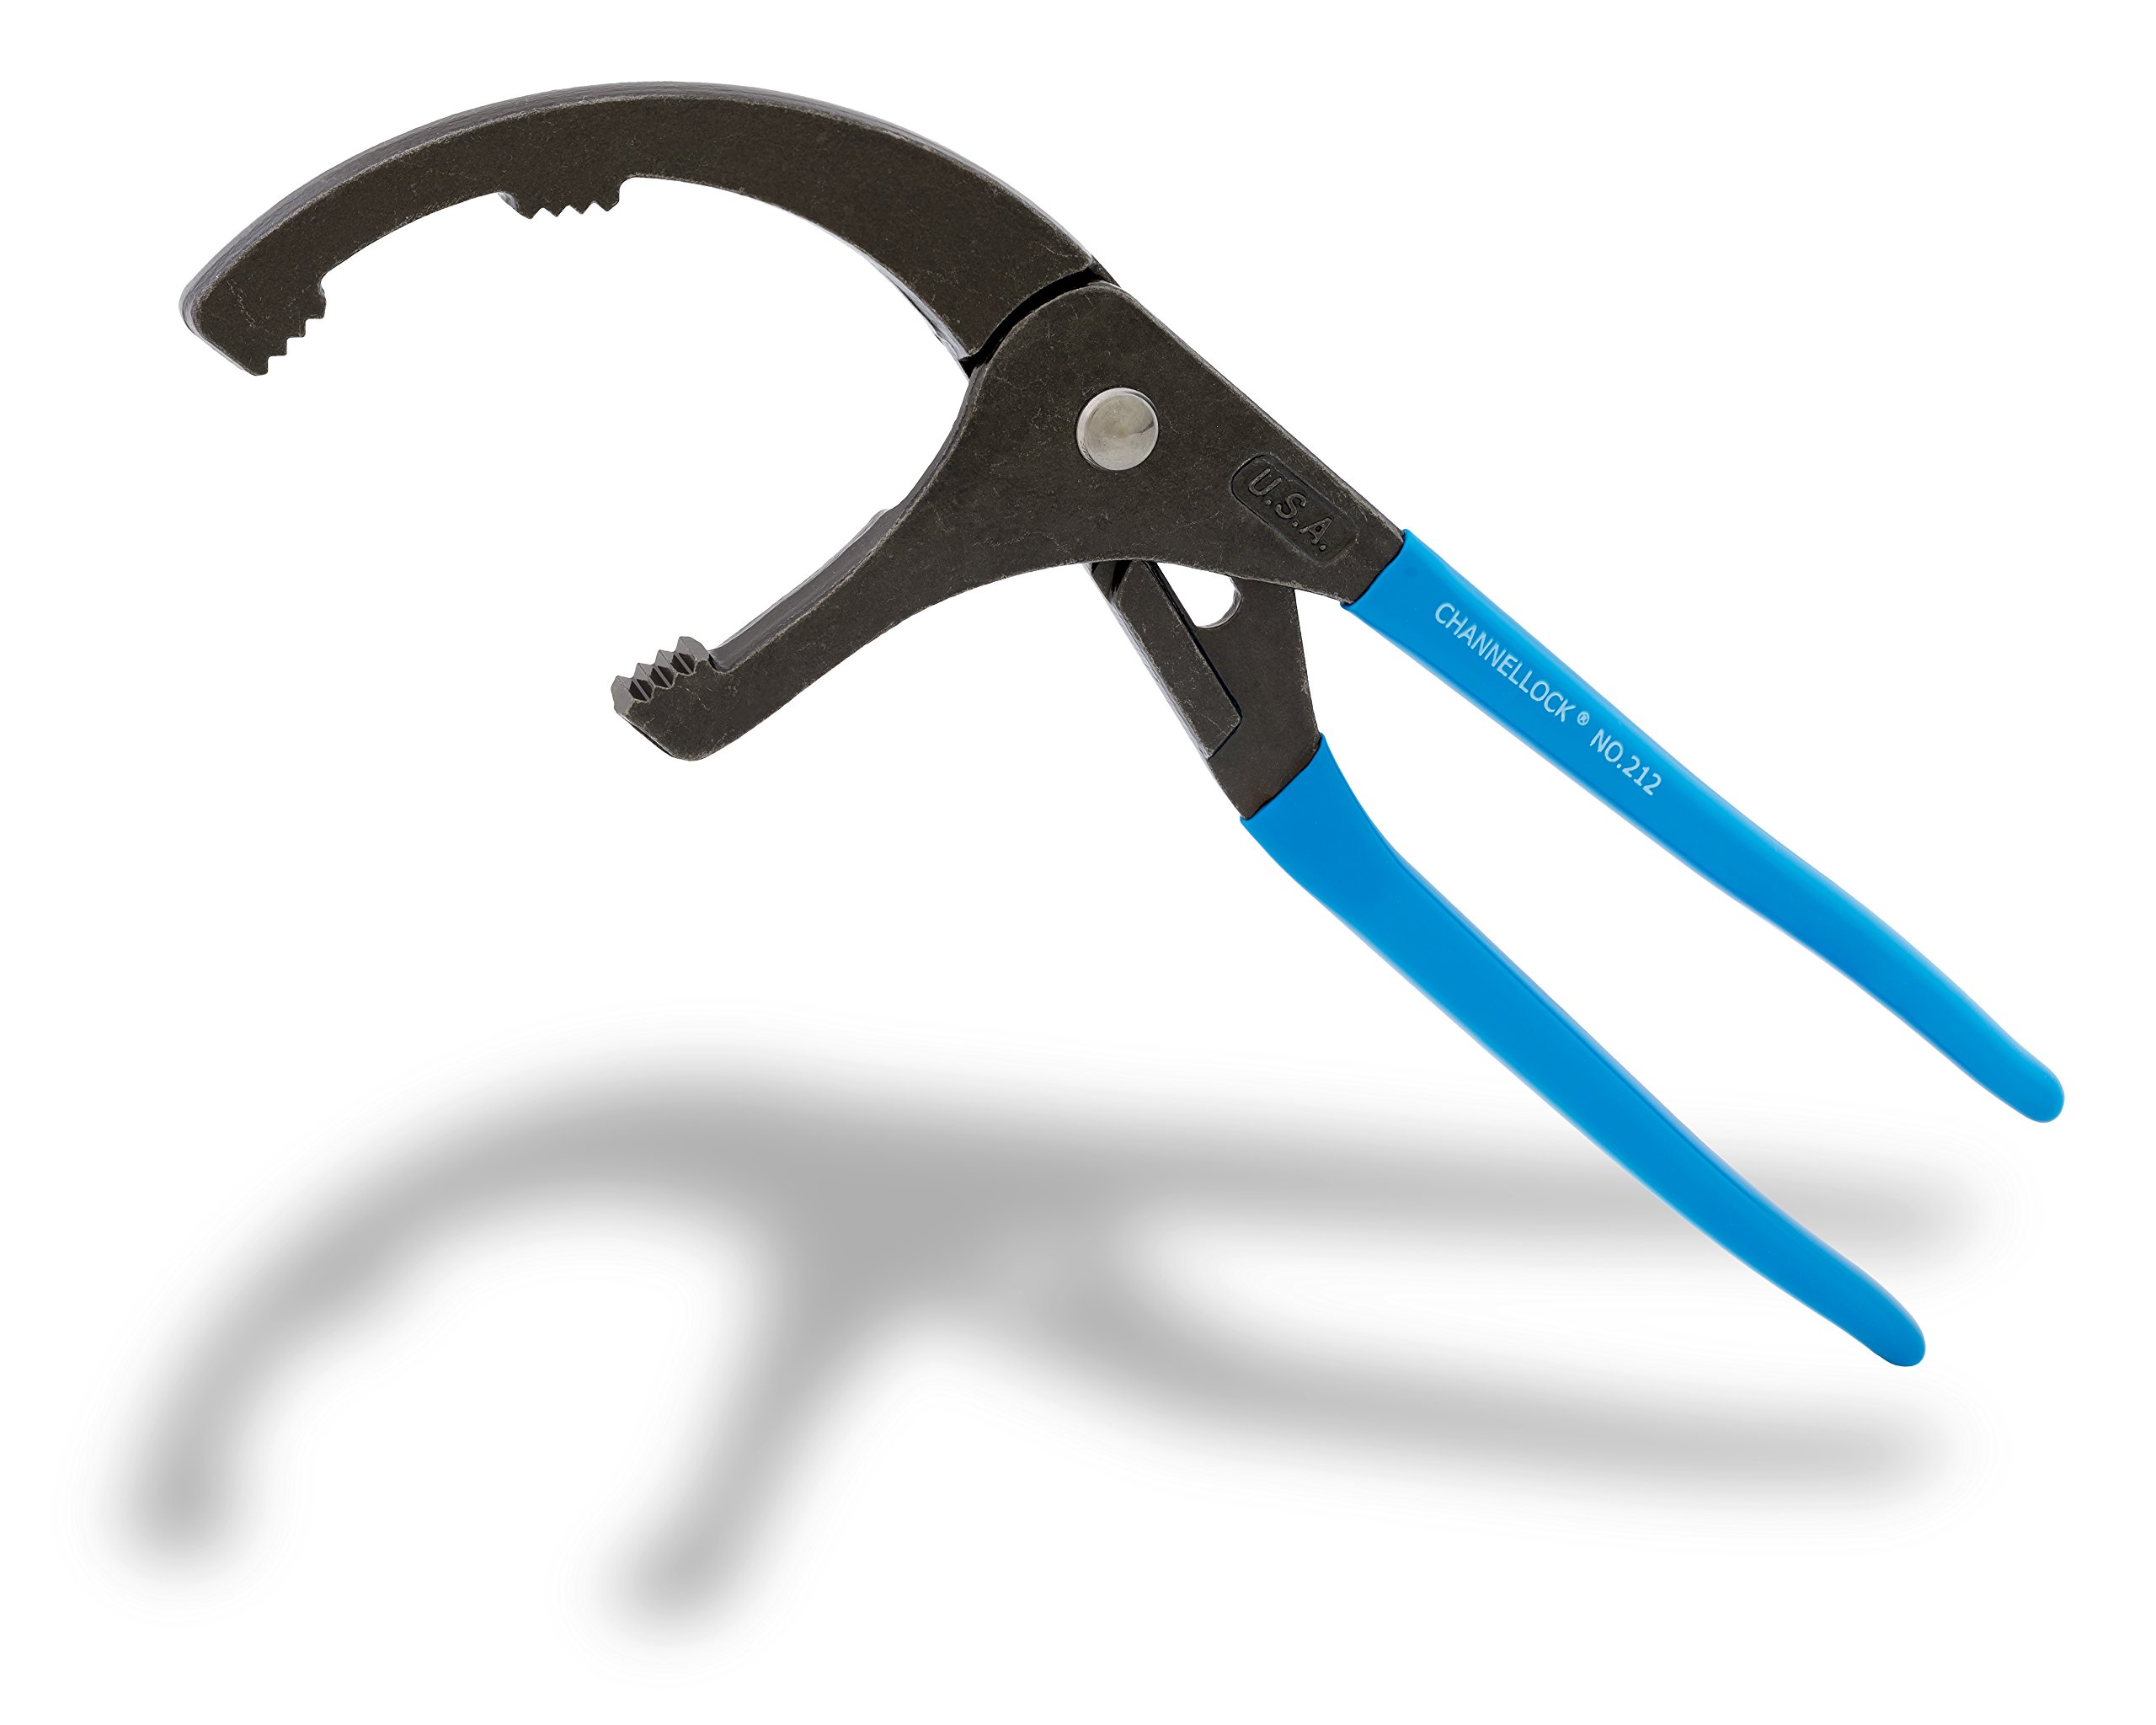 CHANNELLOCK 212 12-inch Oil Filter/PVC Pliers | Made in USA | 2.5 to 3.75-inch Jaw Capacity | Forged High Carbon Steel | Ideal for Engine Oil Filters, Conduit, and Fittings , Blue